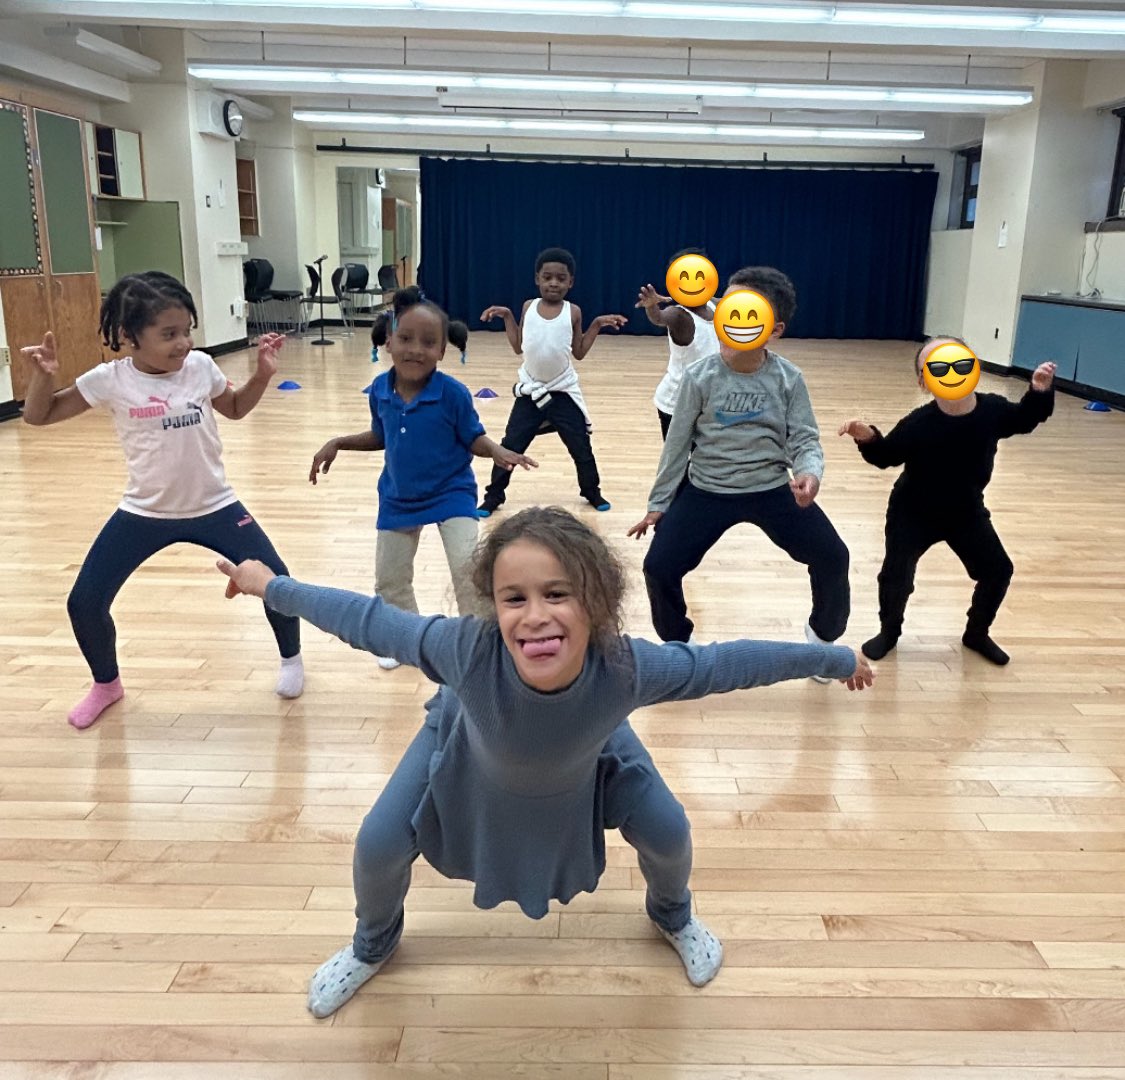 CREATIVE EXPRESSION! These students live to since, dance and show their personalities off! Dance is great exercise. Singing helps build self confidence and public speaking skills. Personality - we can’t take credit for that! #artseducation #creativity #dance #studentshavingfun